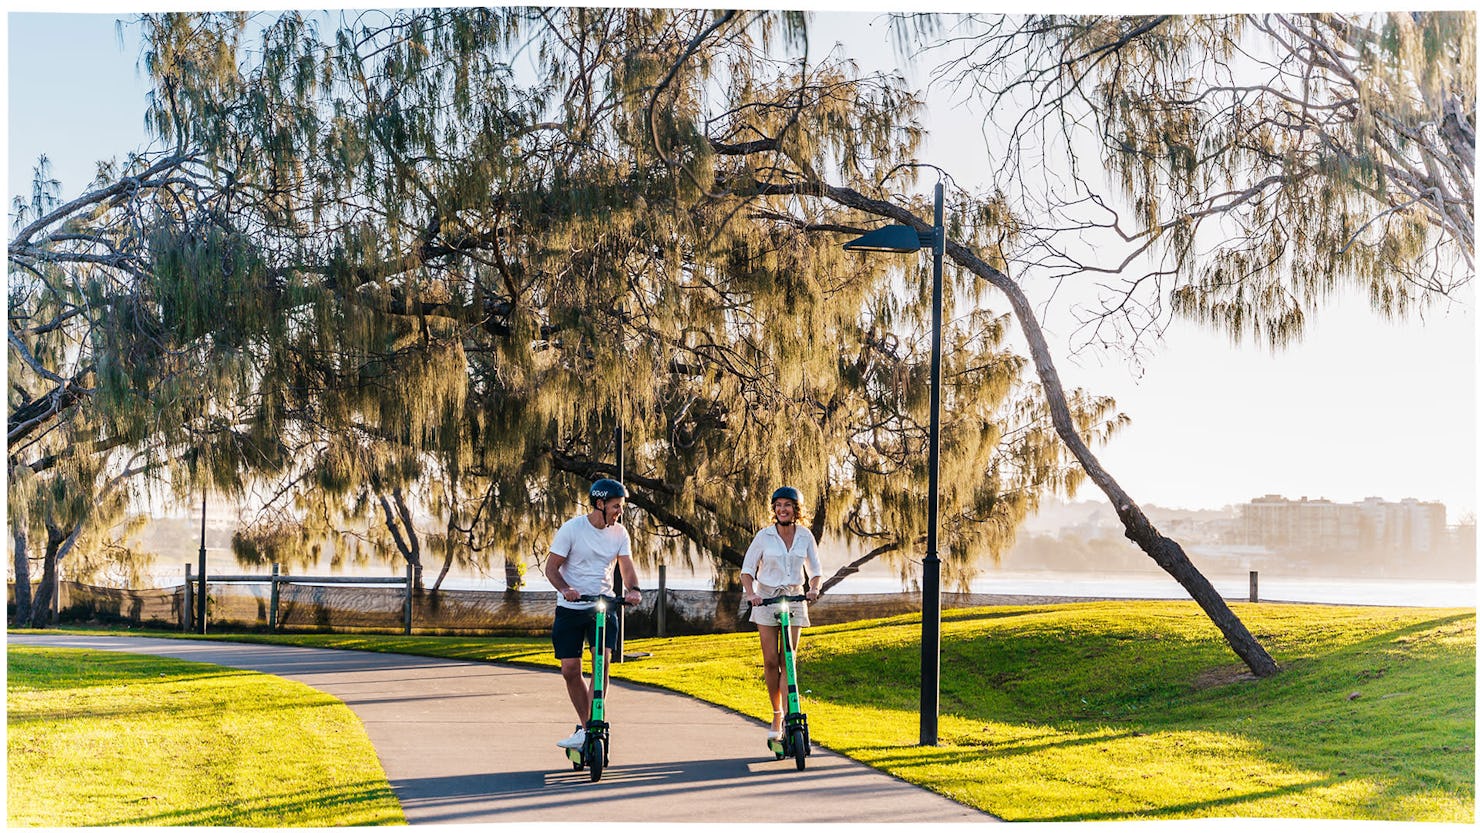 Hire an Oggy Scooter or take a walk along Mooloolaba paths.